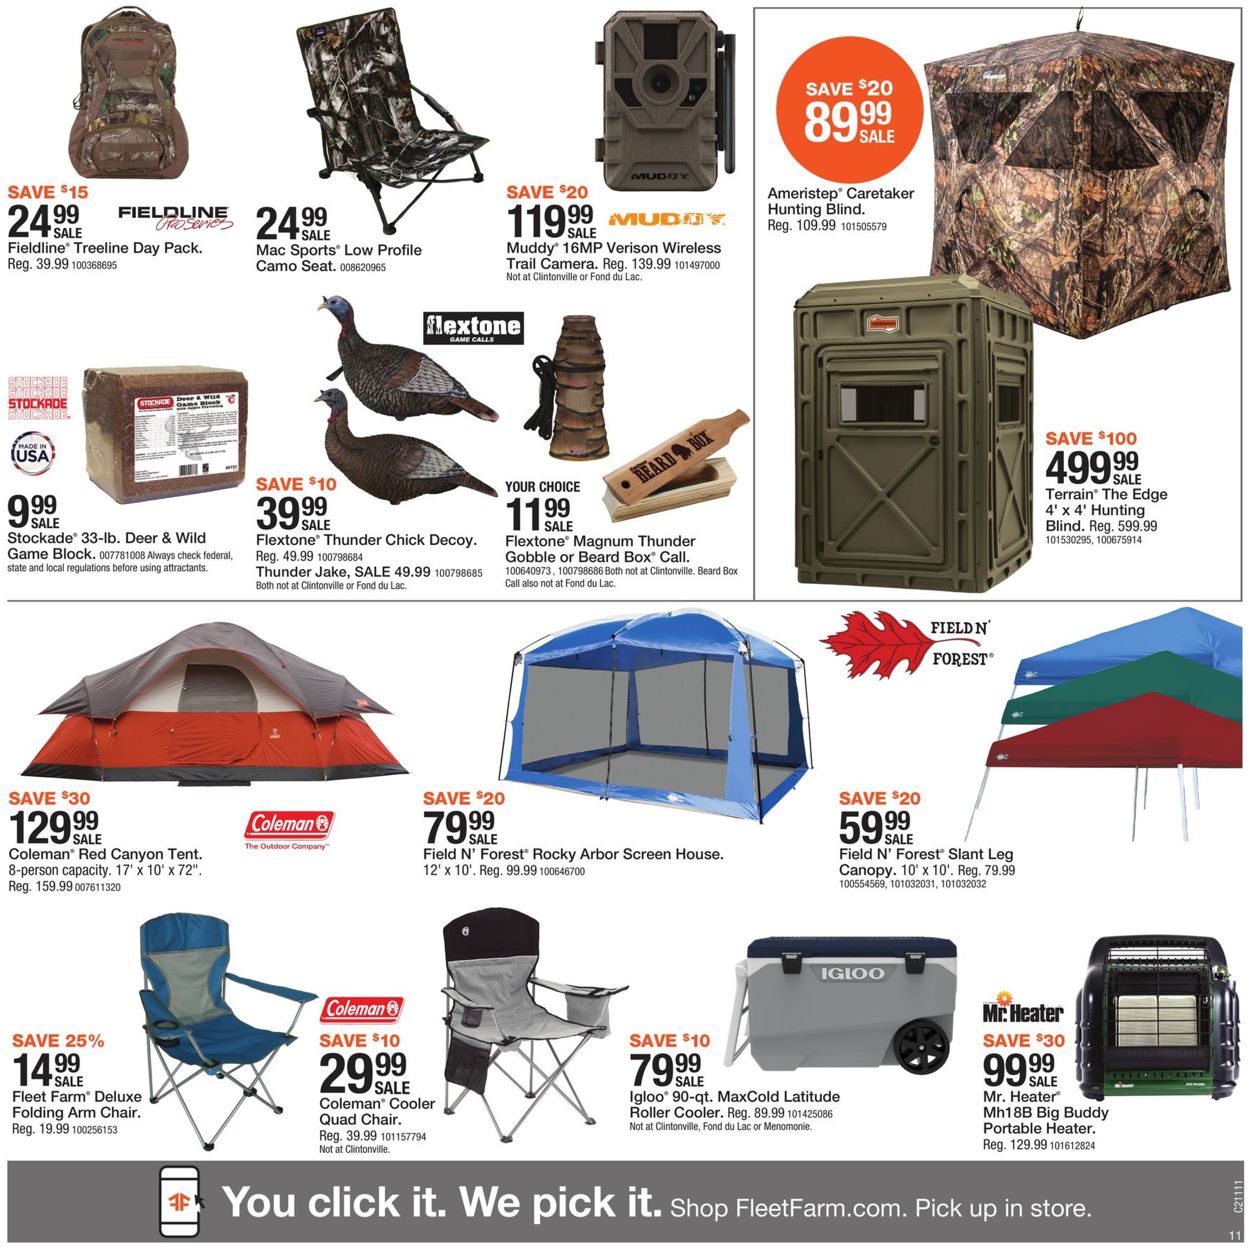 Mills Fleet Farm Current weekly ad 03/12 - 03/20/2021 [11] - frequent ...